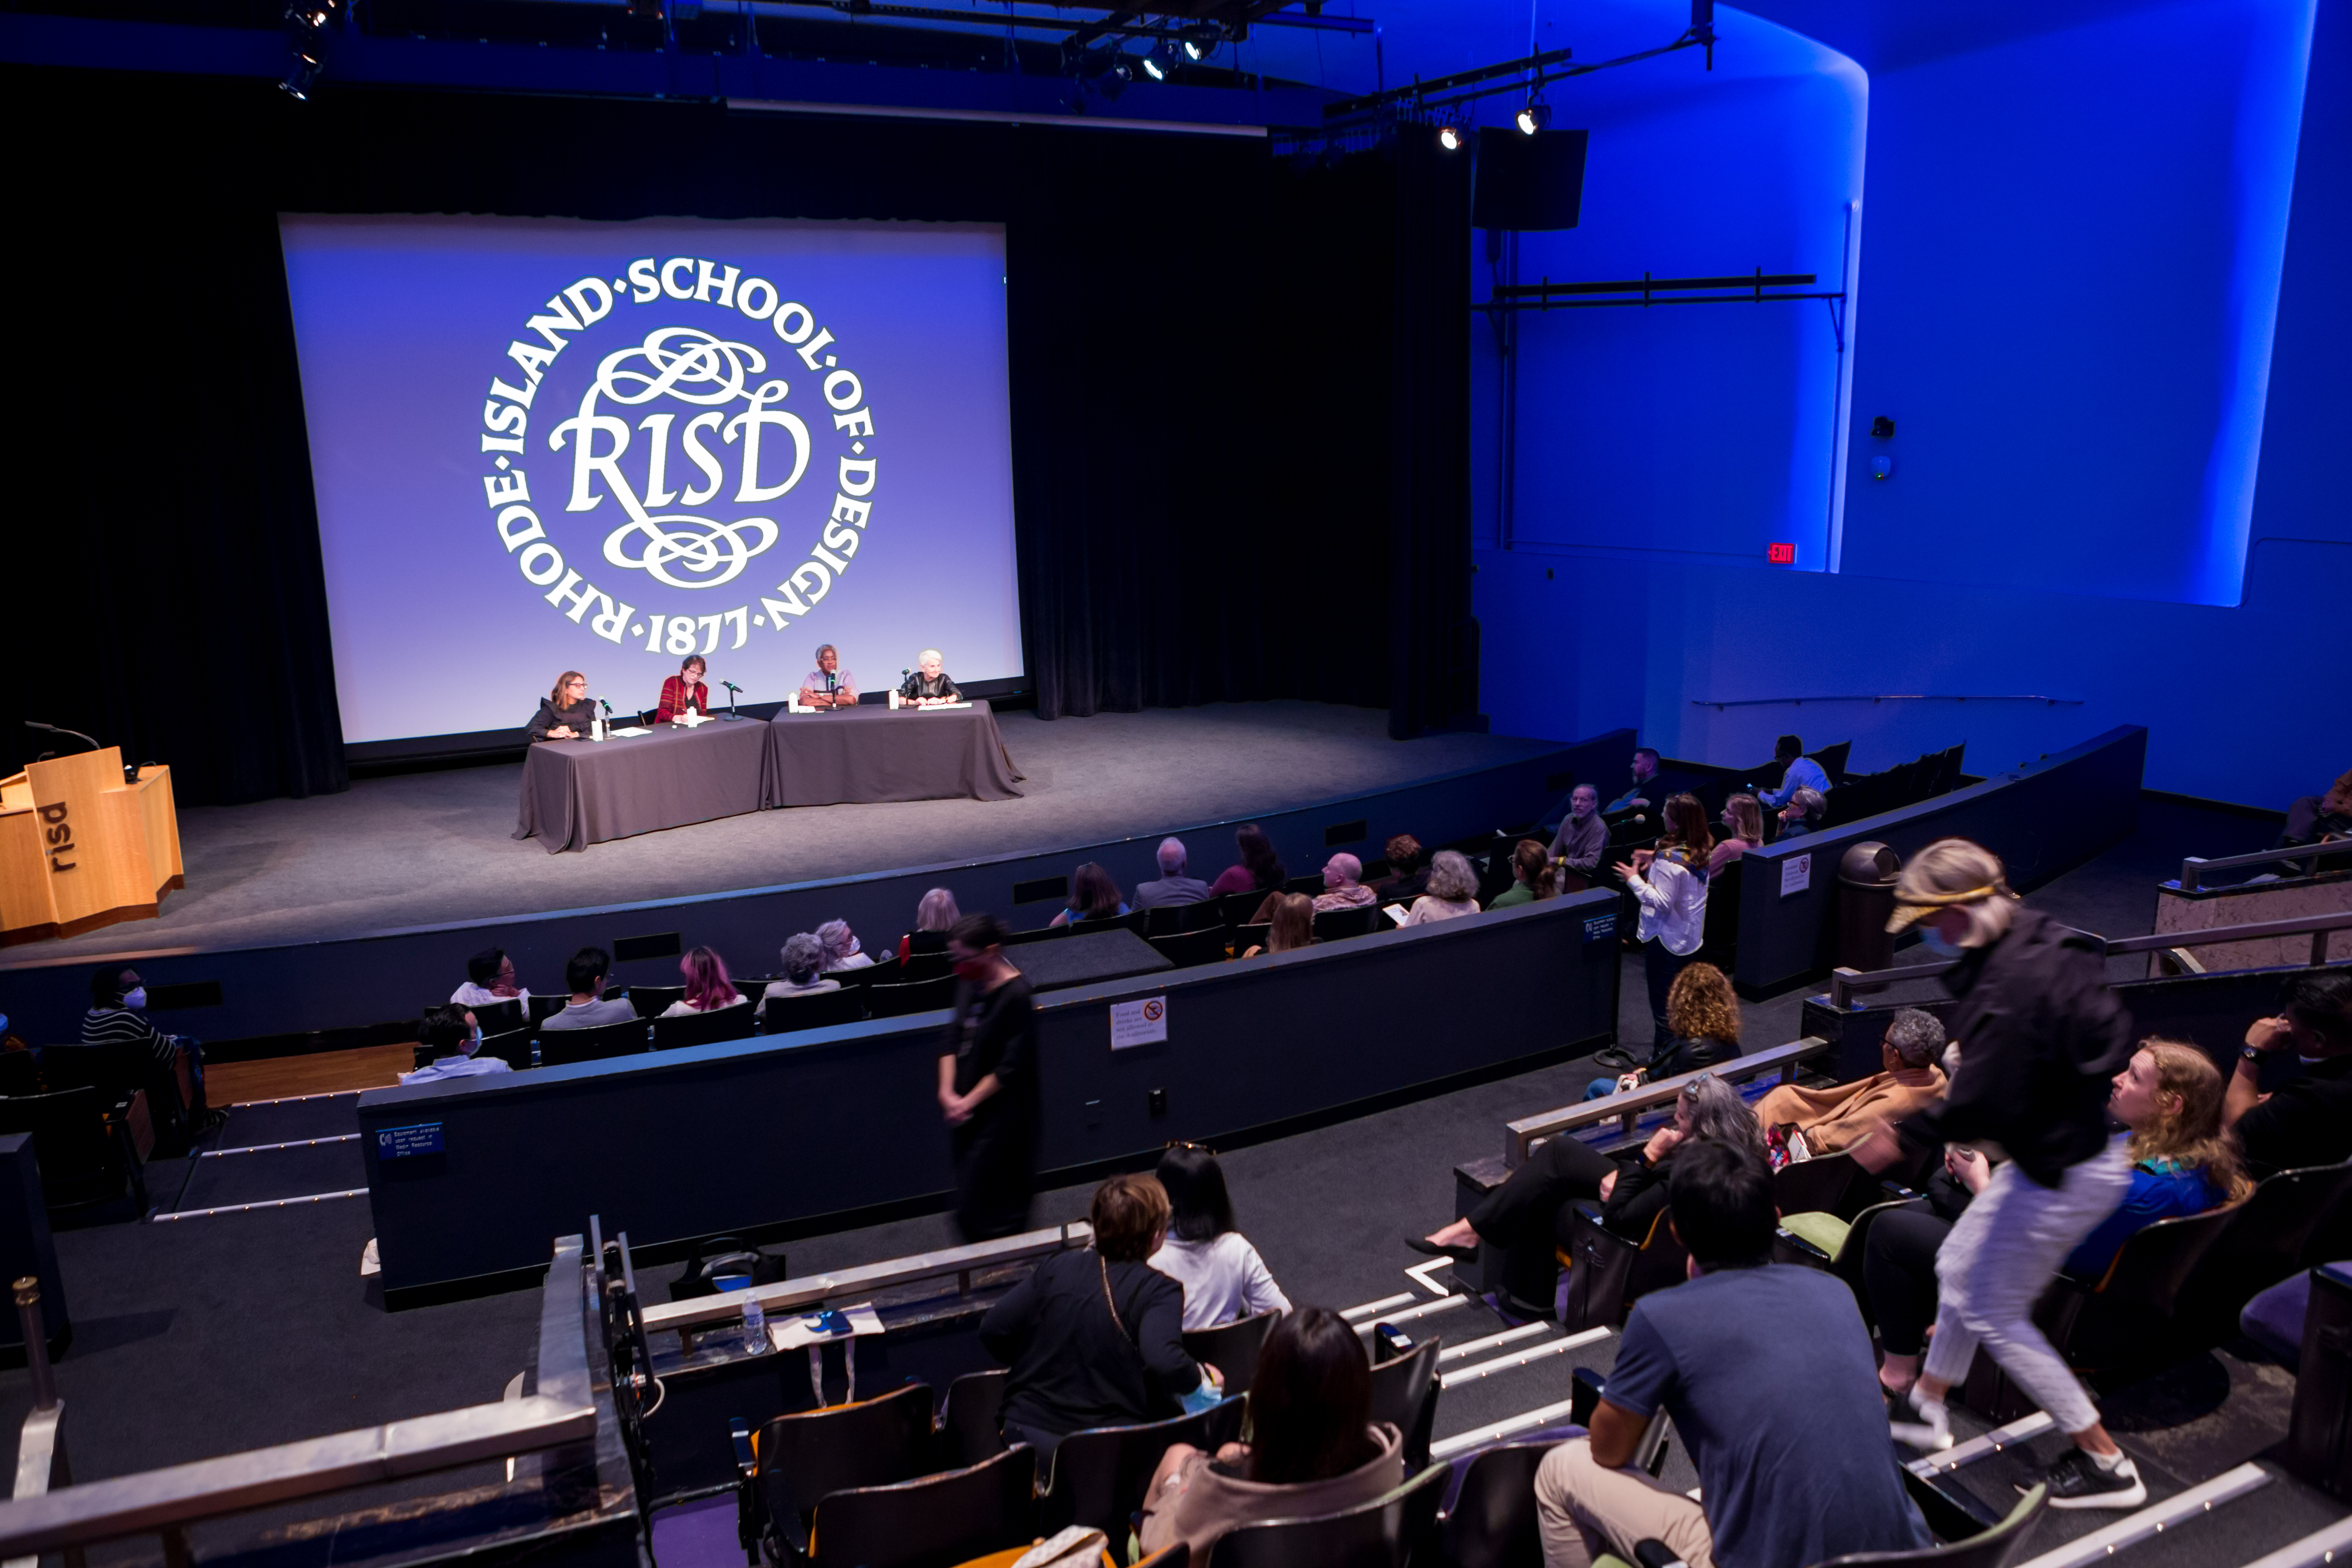 /A%20panel%20of%20four%20people%20presents%20in%20an%20auditorium.%20The%20RISD%20seal%20is%20projected%20behind%20them.